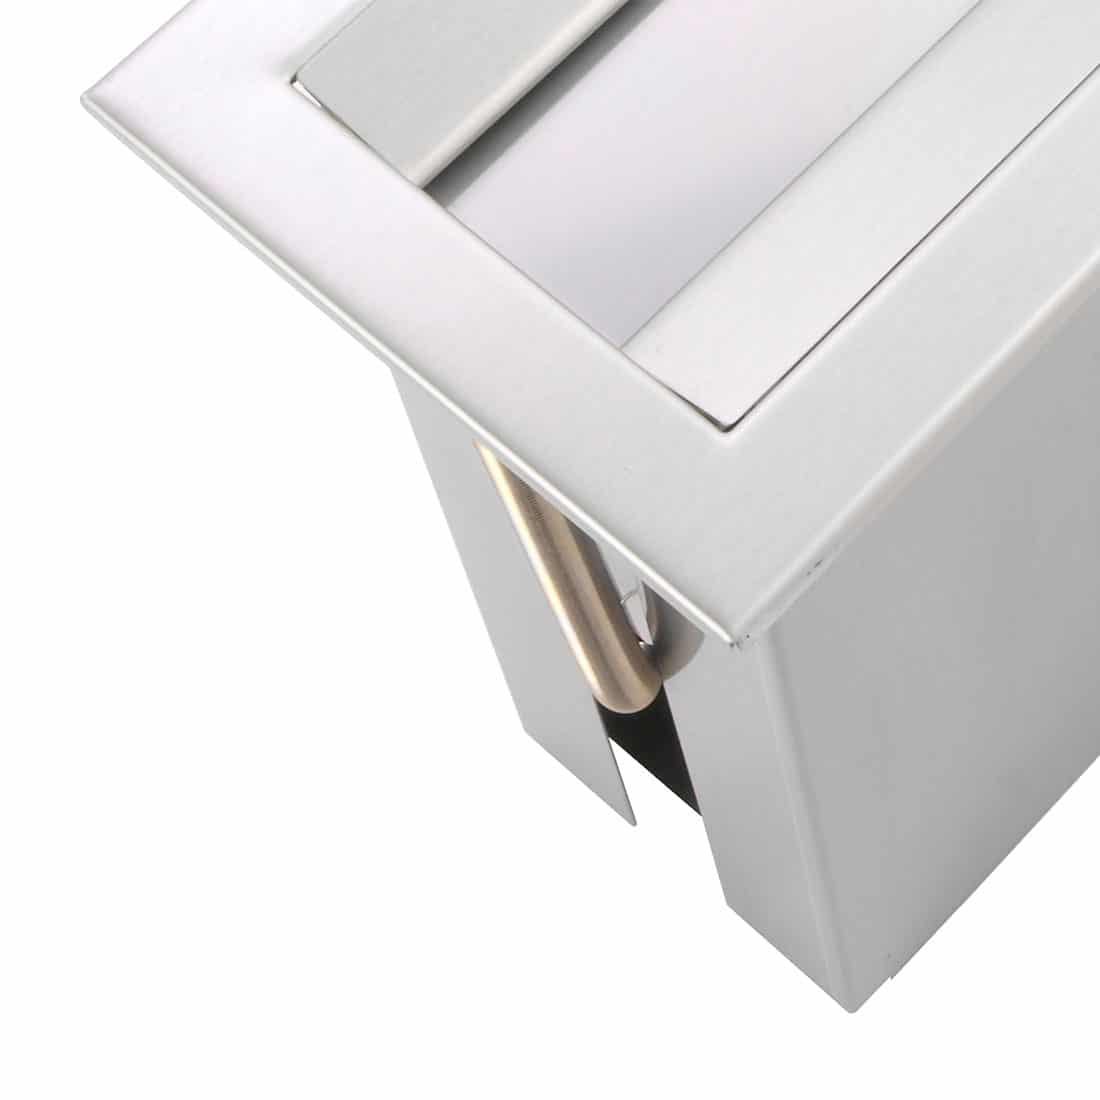 Countertop Paper Towel Holder with Drawer GM27